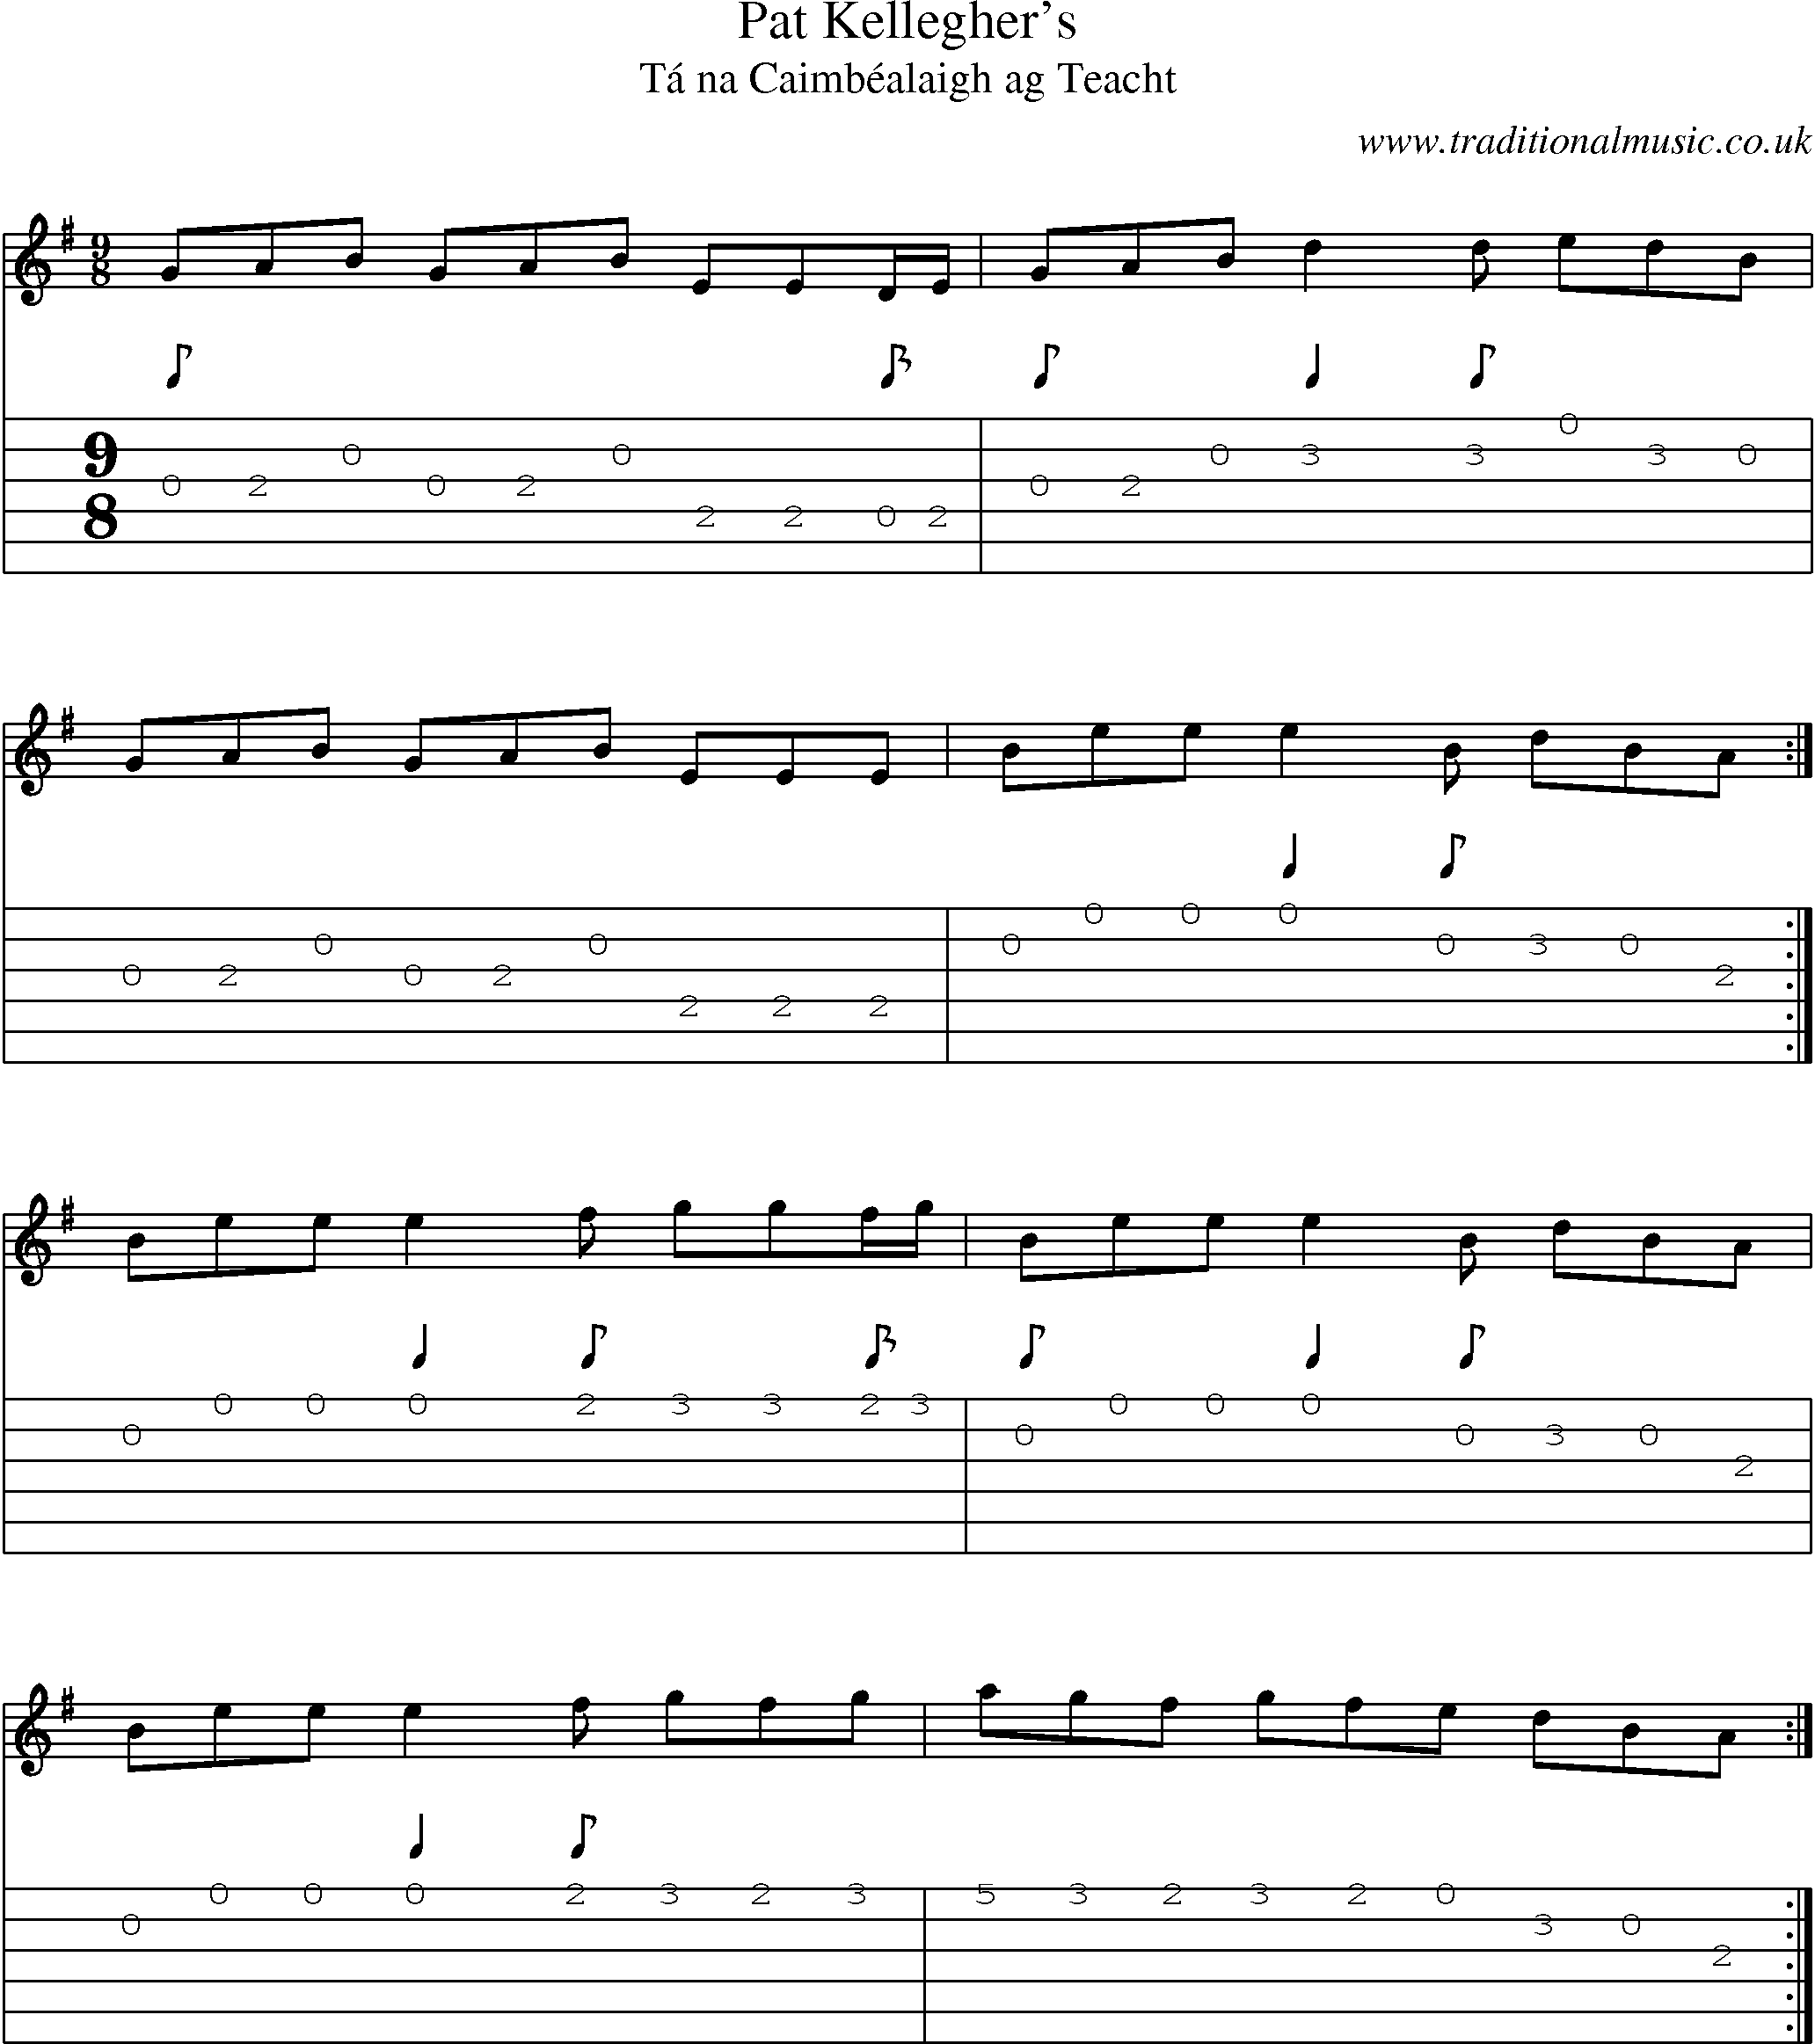 Music Score and Guitar Tabs for Pat Kelleghers